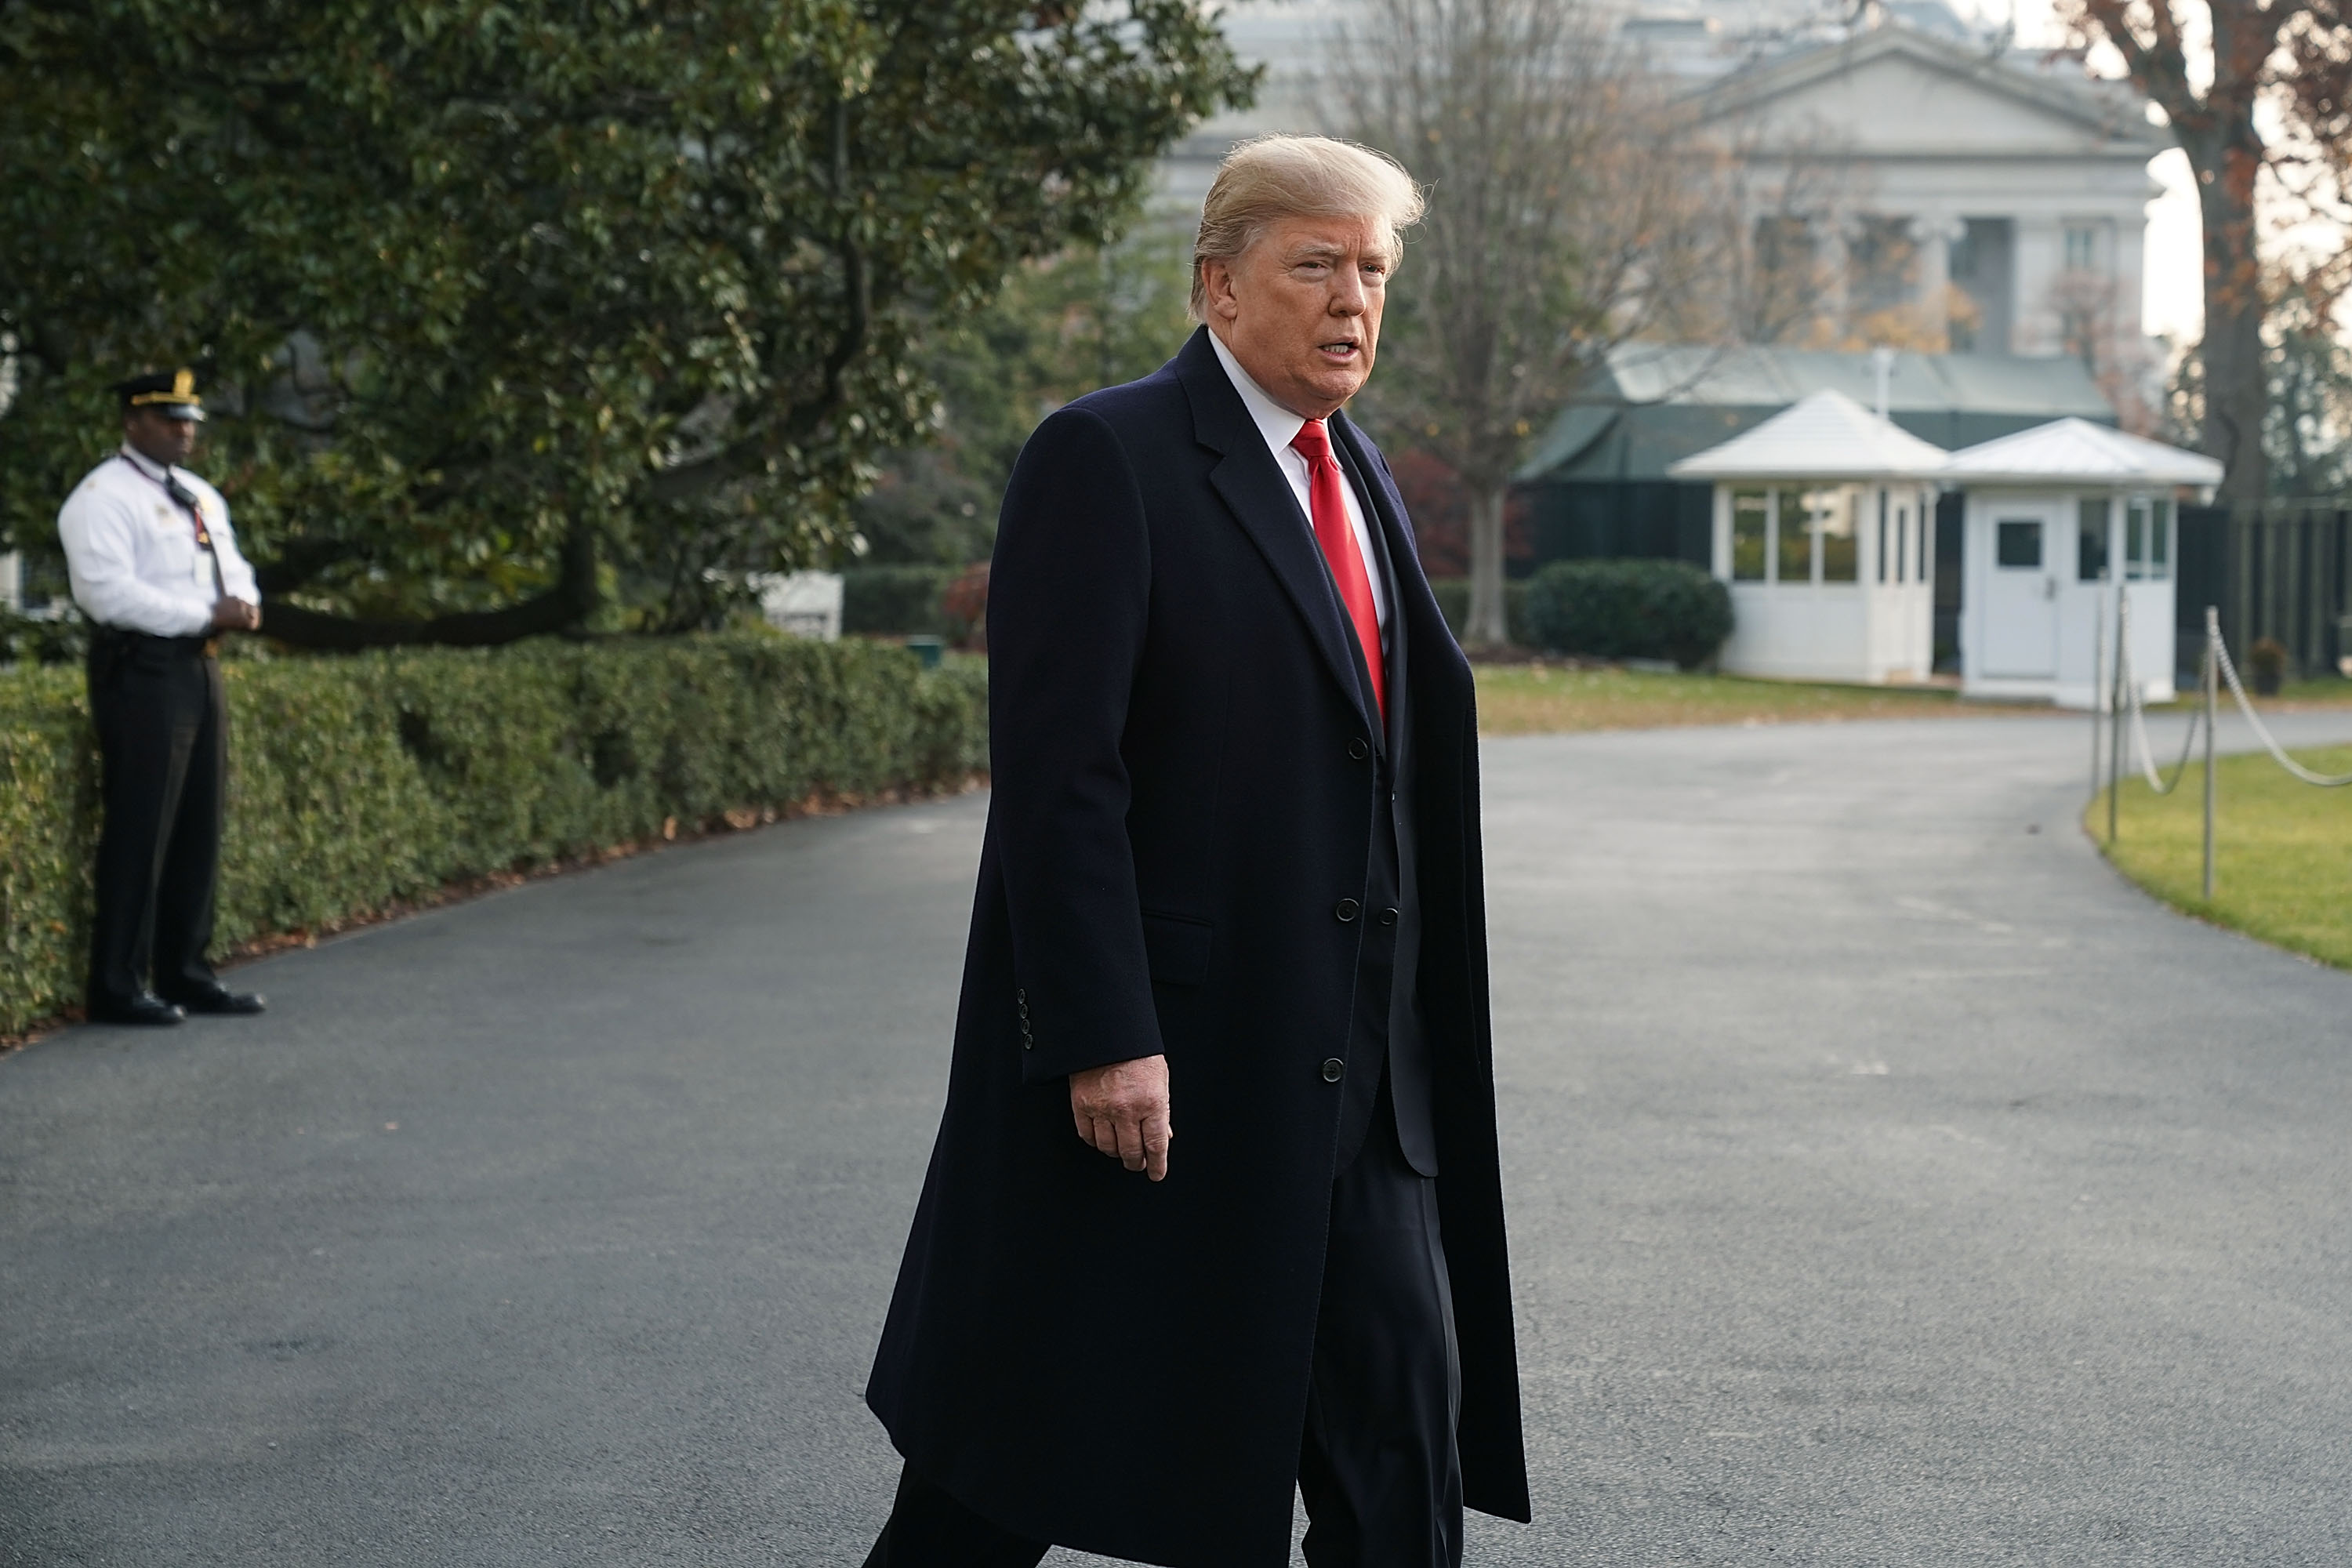 President Donald Trump approaches members of the media to speak on former national security adviser Michael Flynn’s lying to the FBI prior to his Marine One departure from the South Lawn of the White House December 4, 2017 in Washington, DC.&nbsp;